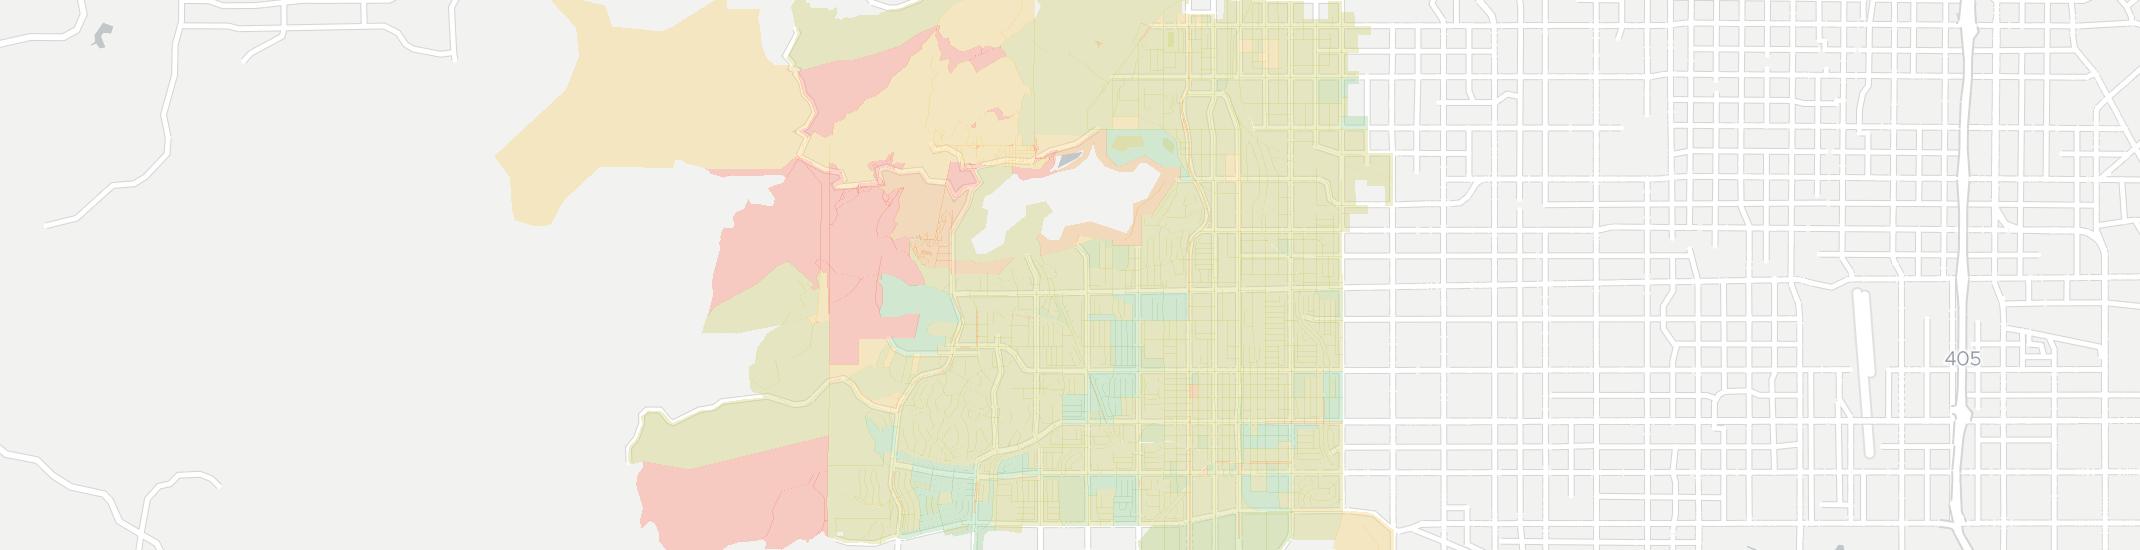 Canoga Park Internet Competition Map. Click for interactive map